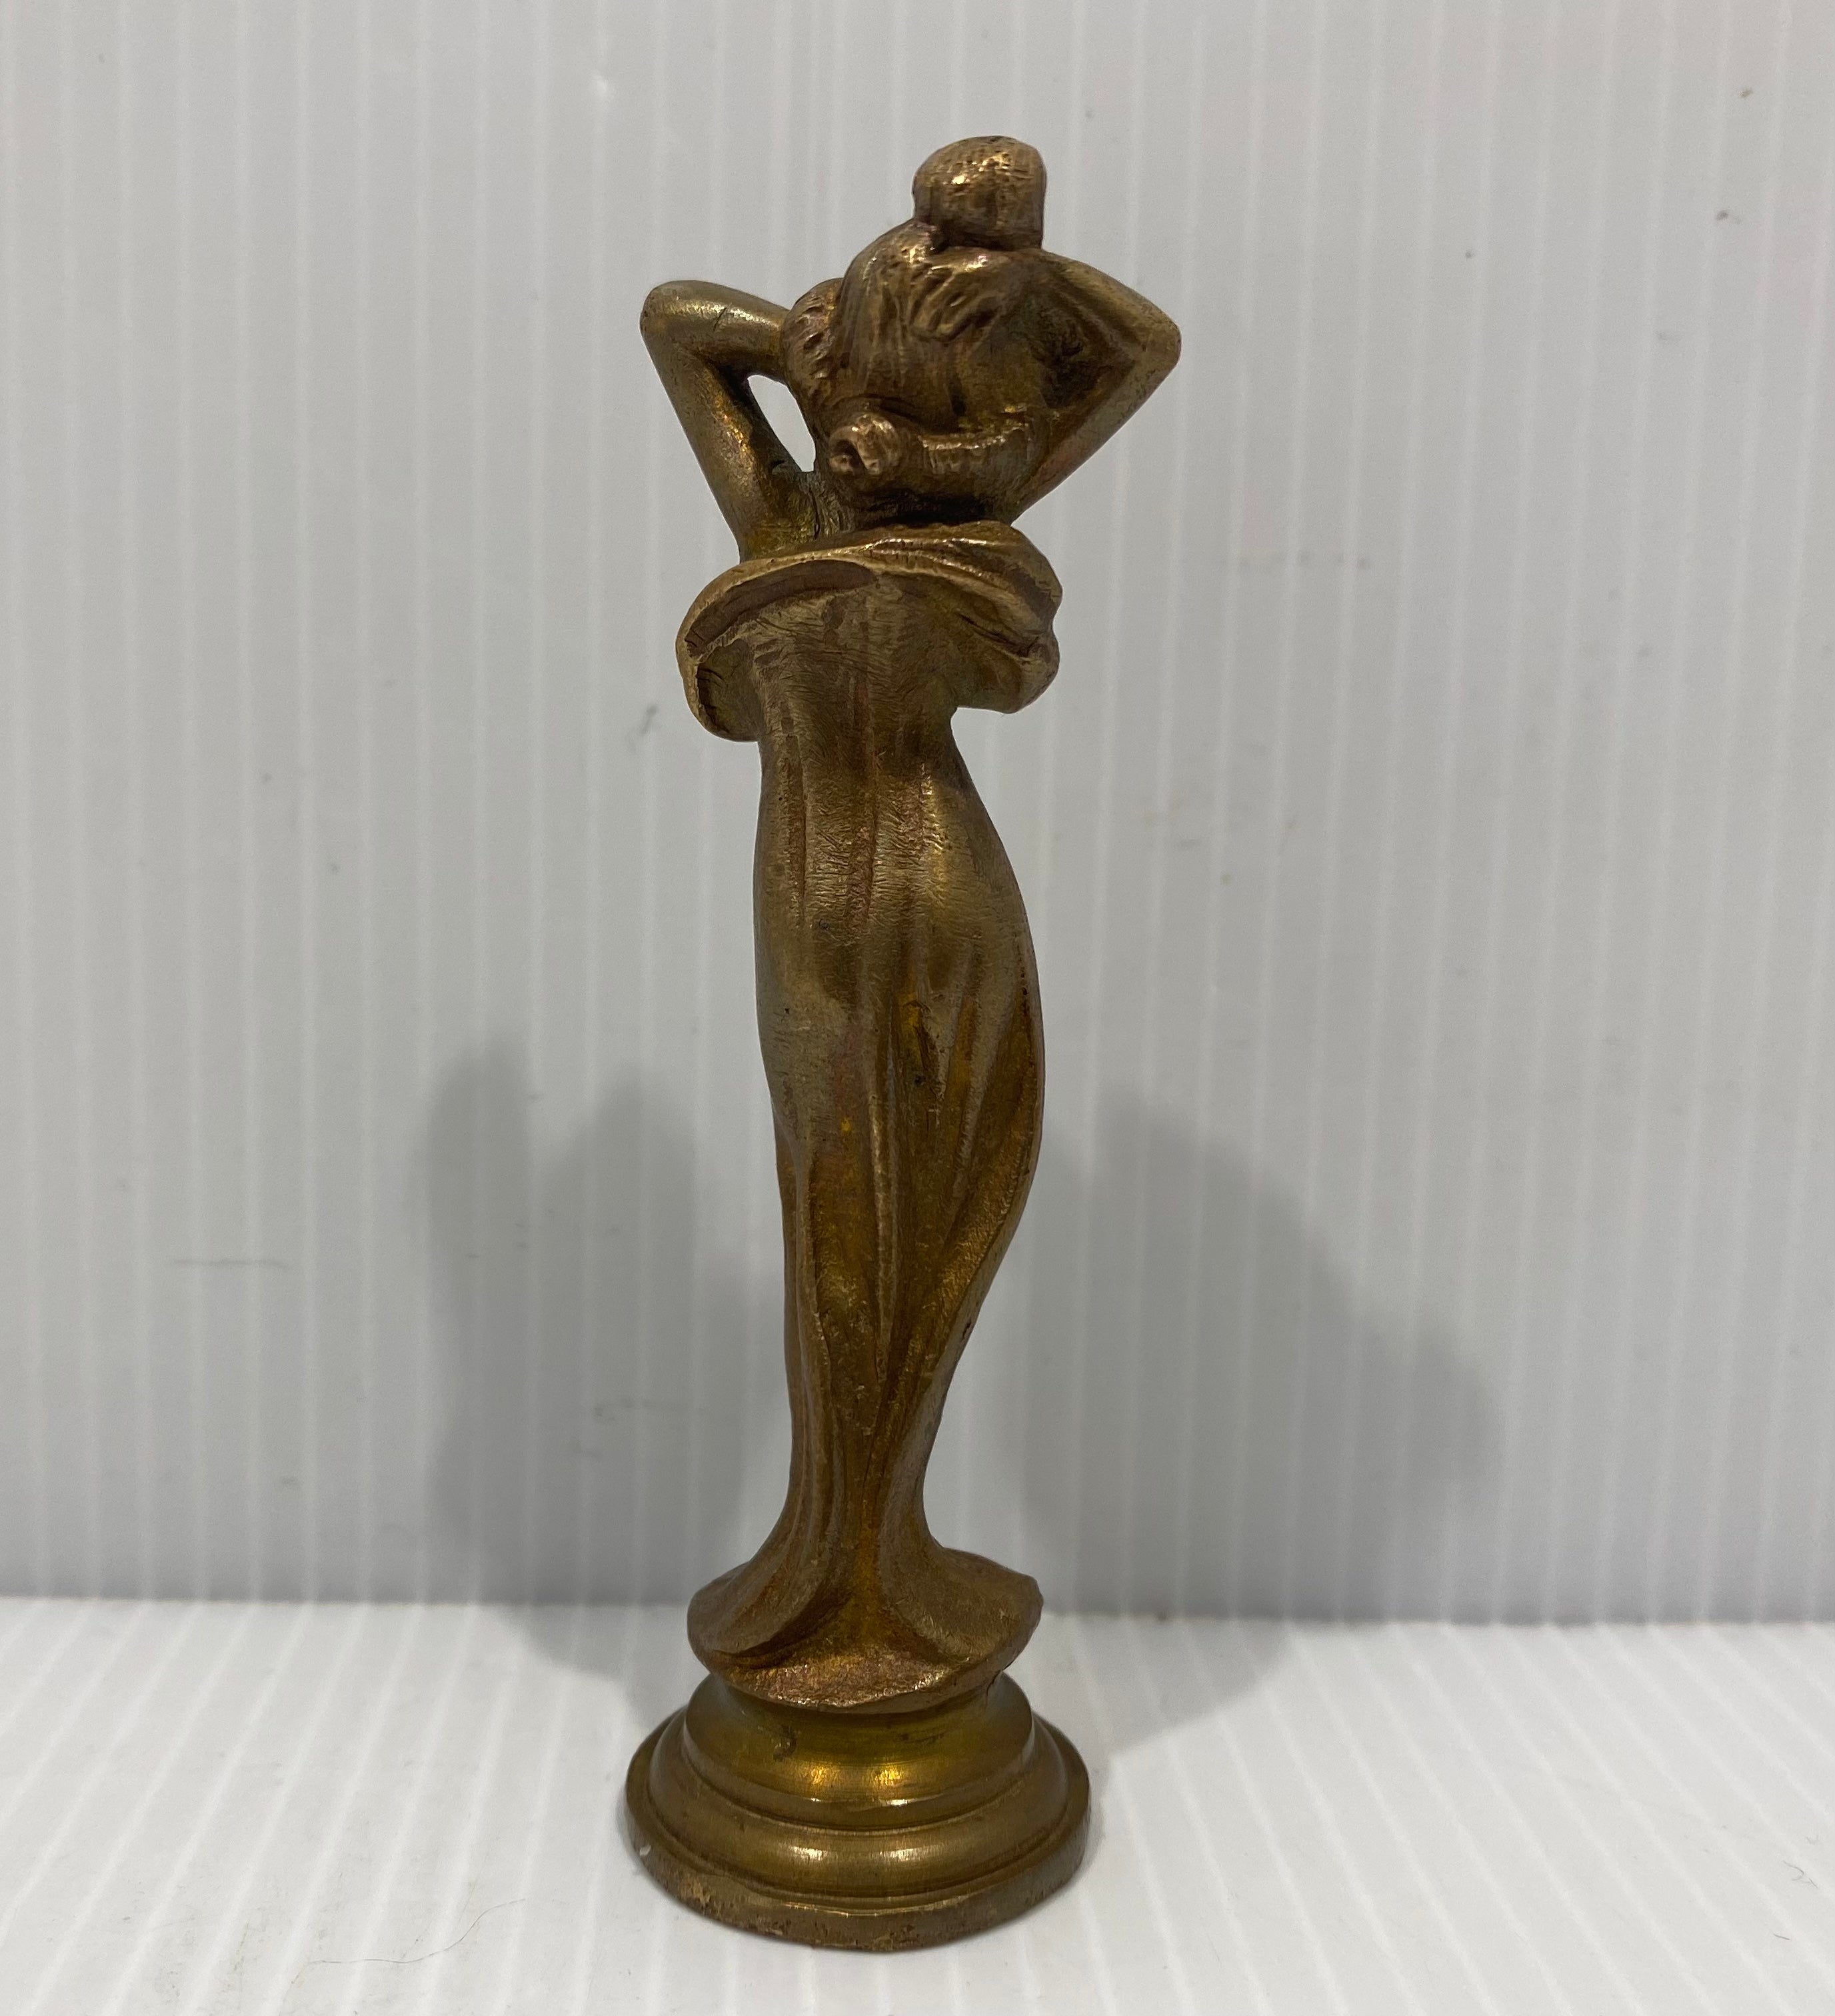 A lovely Art Nouveau bronze wax seal stamp of a woman figure, with long hair standing in a gown atop a beveled round base.